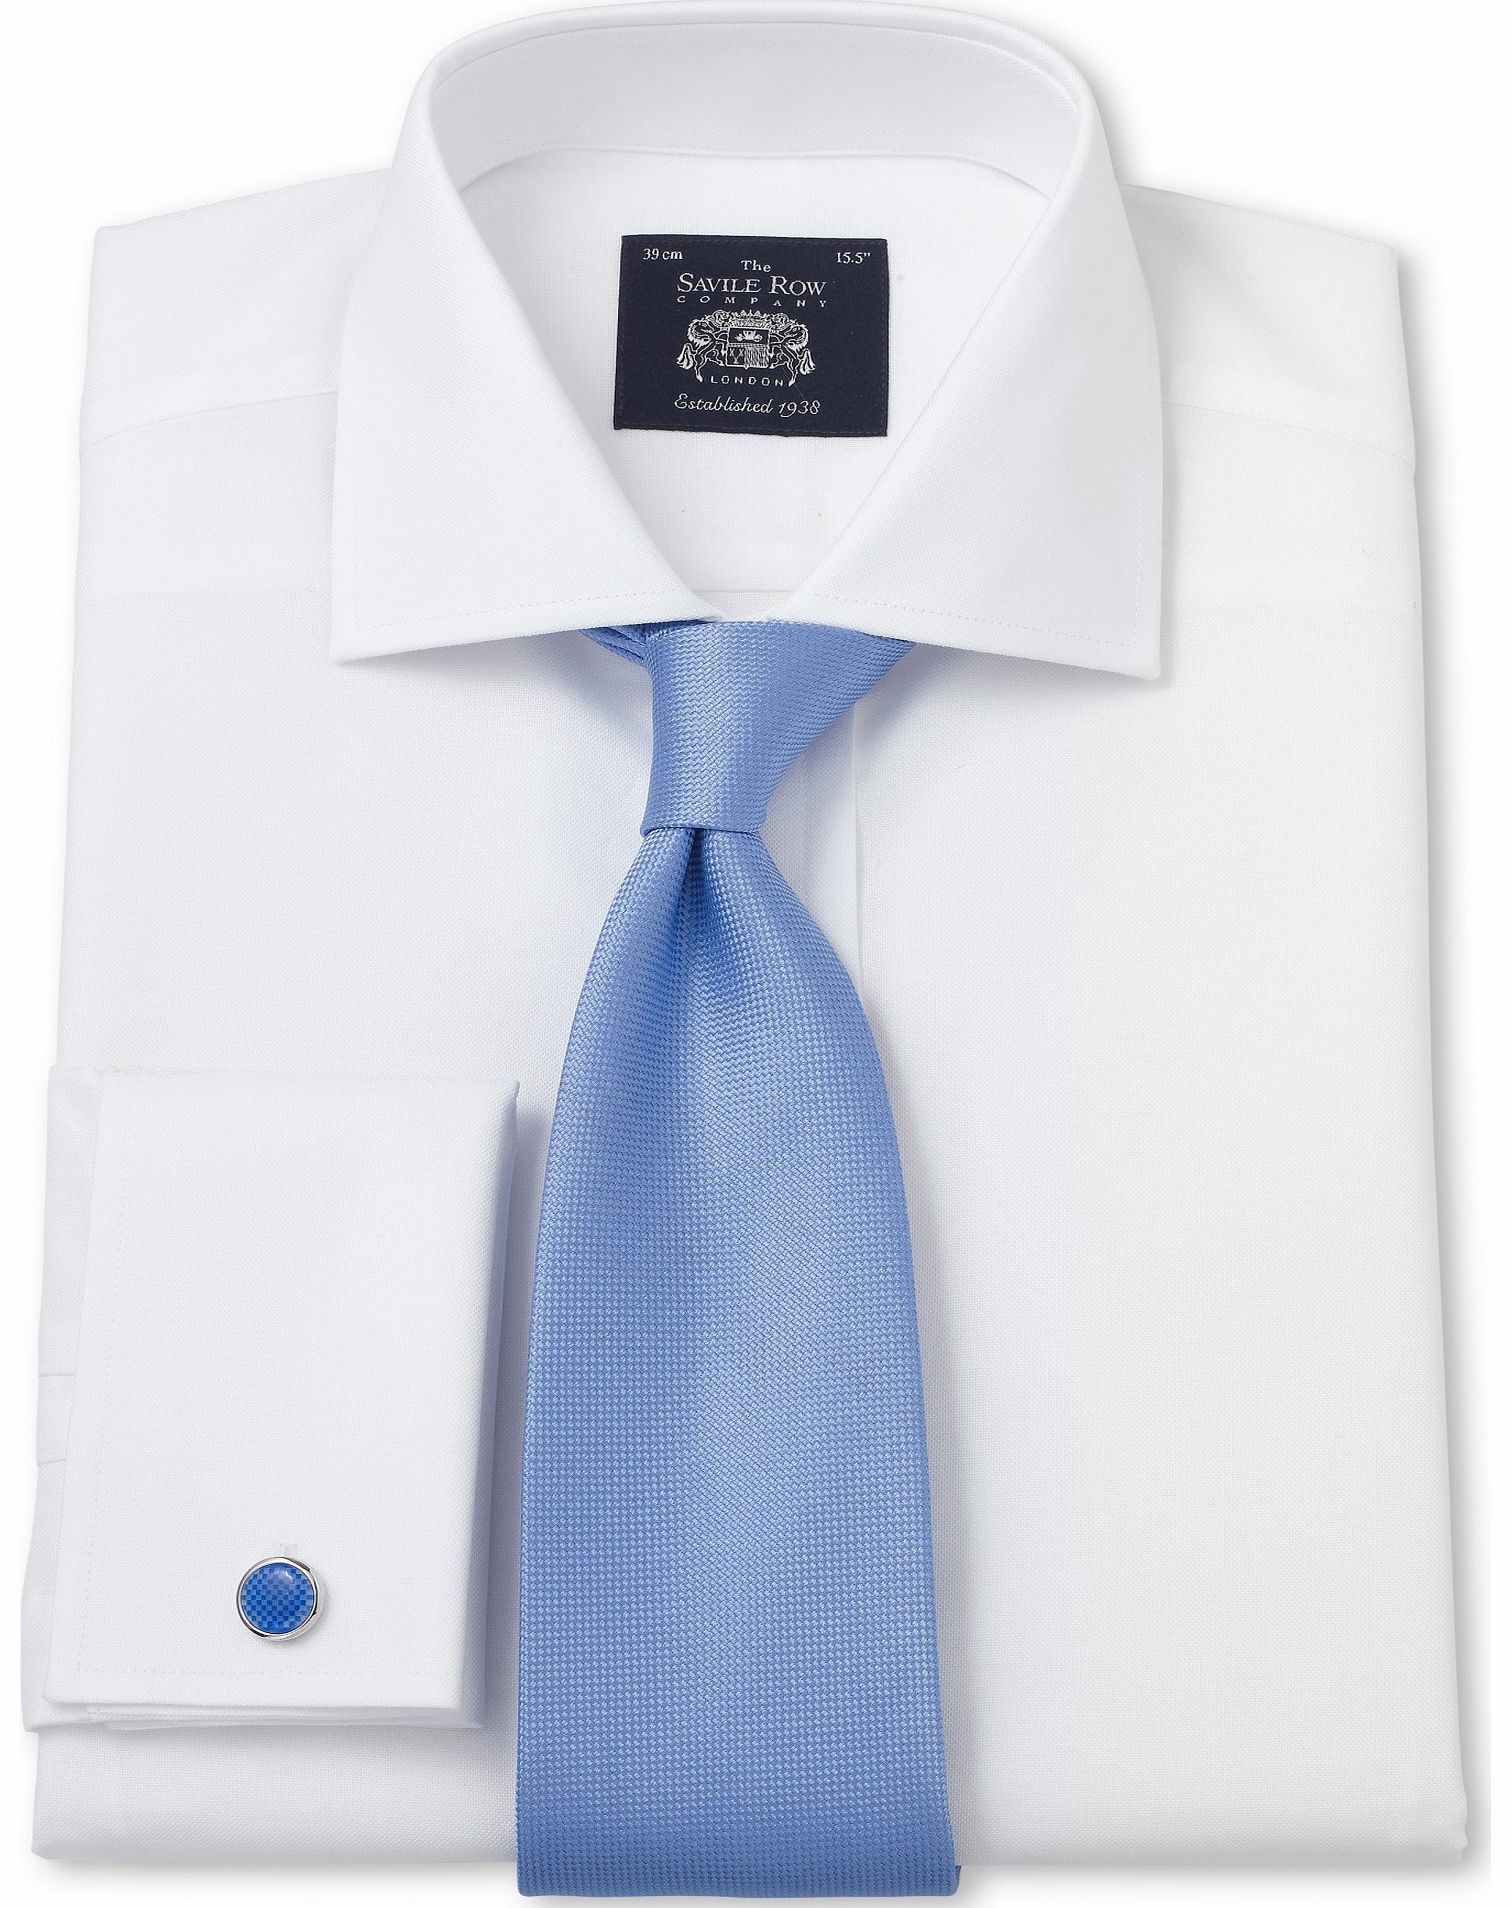 Savile Row Company White Pinpoint Slim Fit Shirt 17`` Lengthened